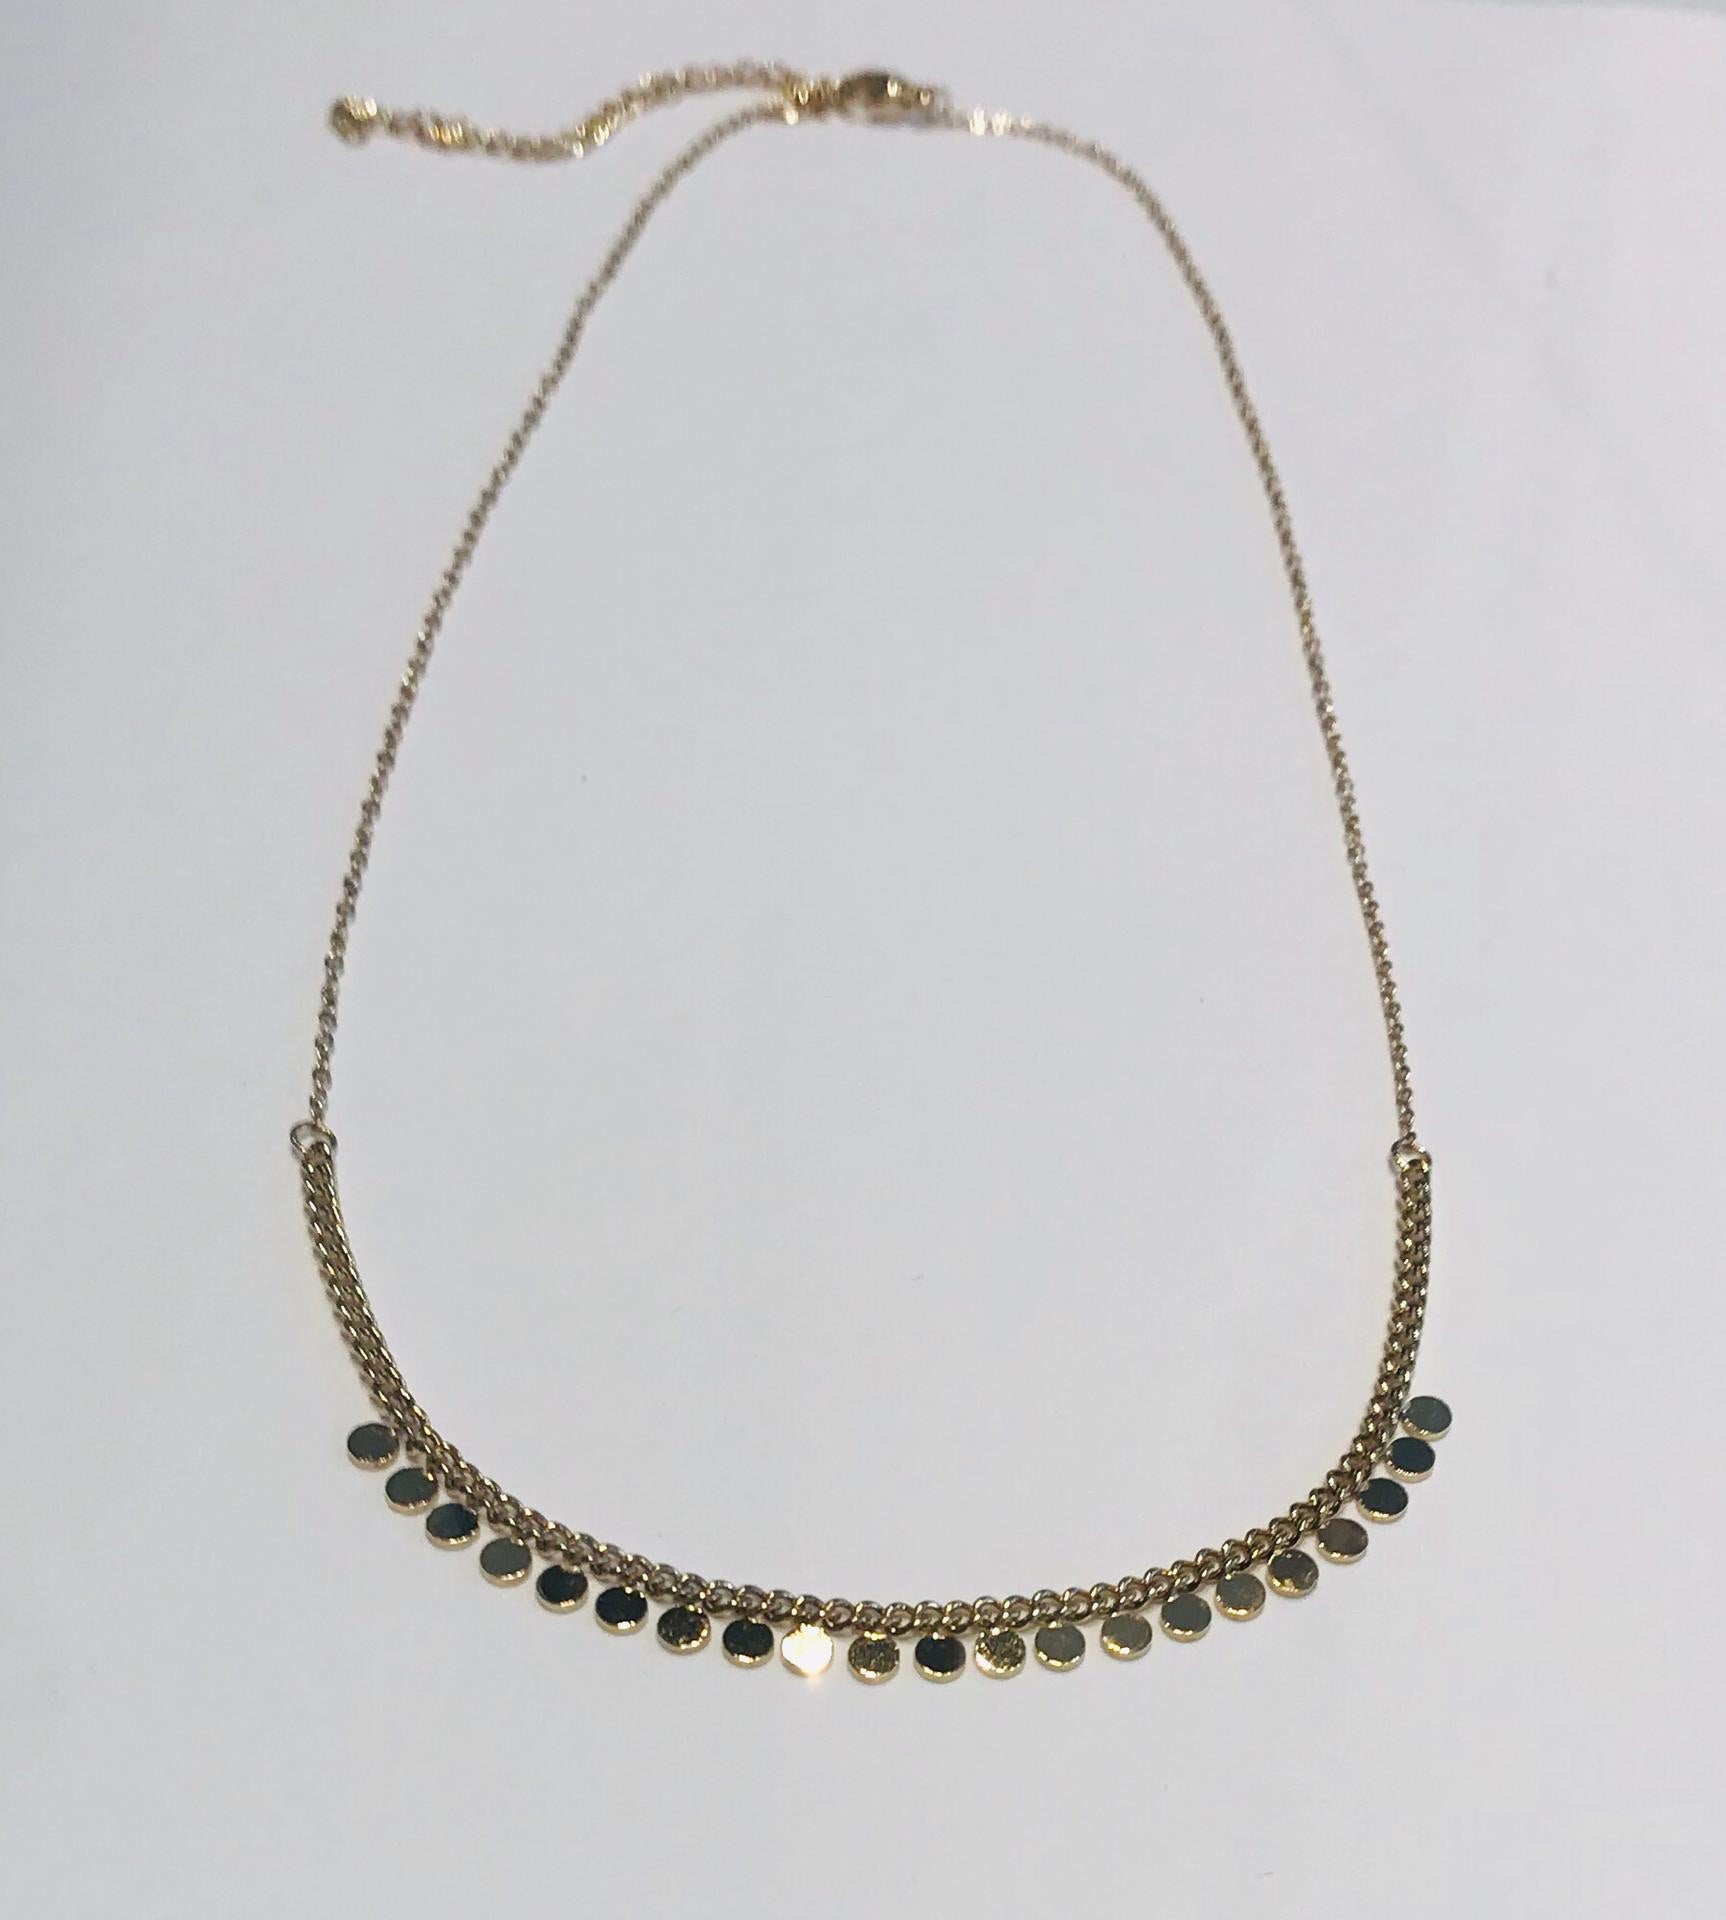 Steel necklace with small circle pendants by SAM&CEL.